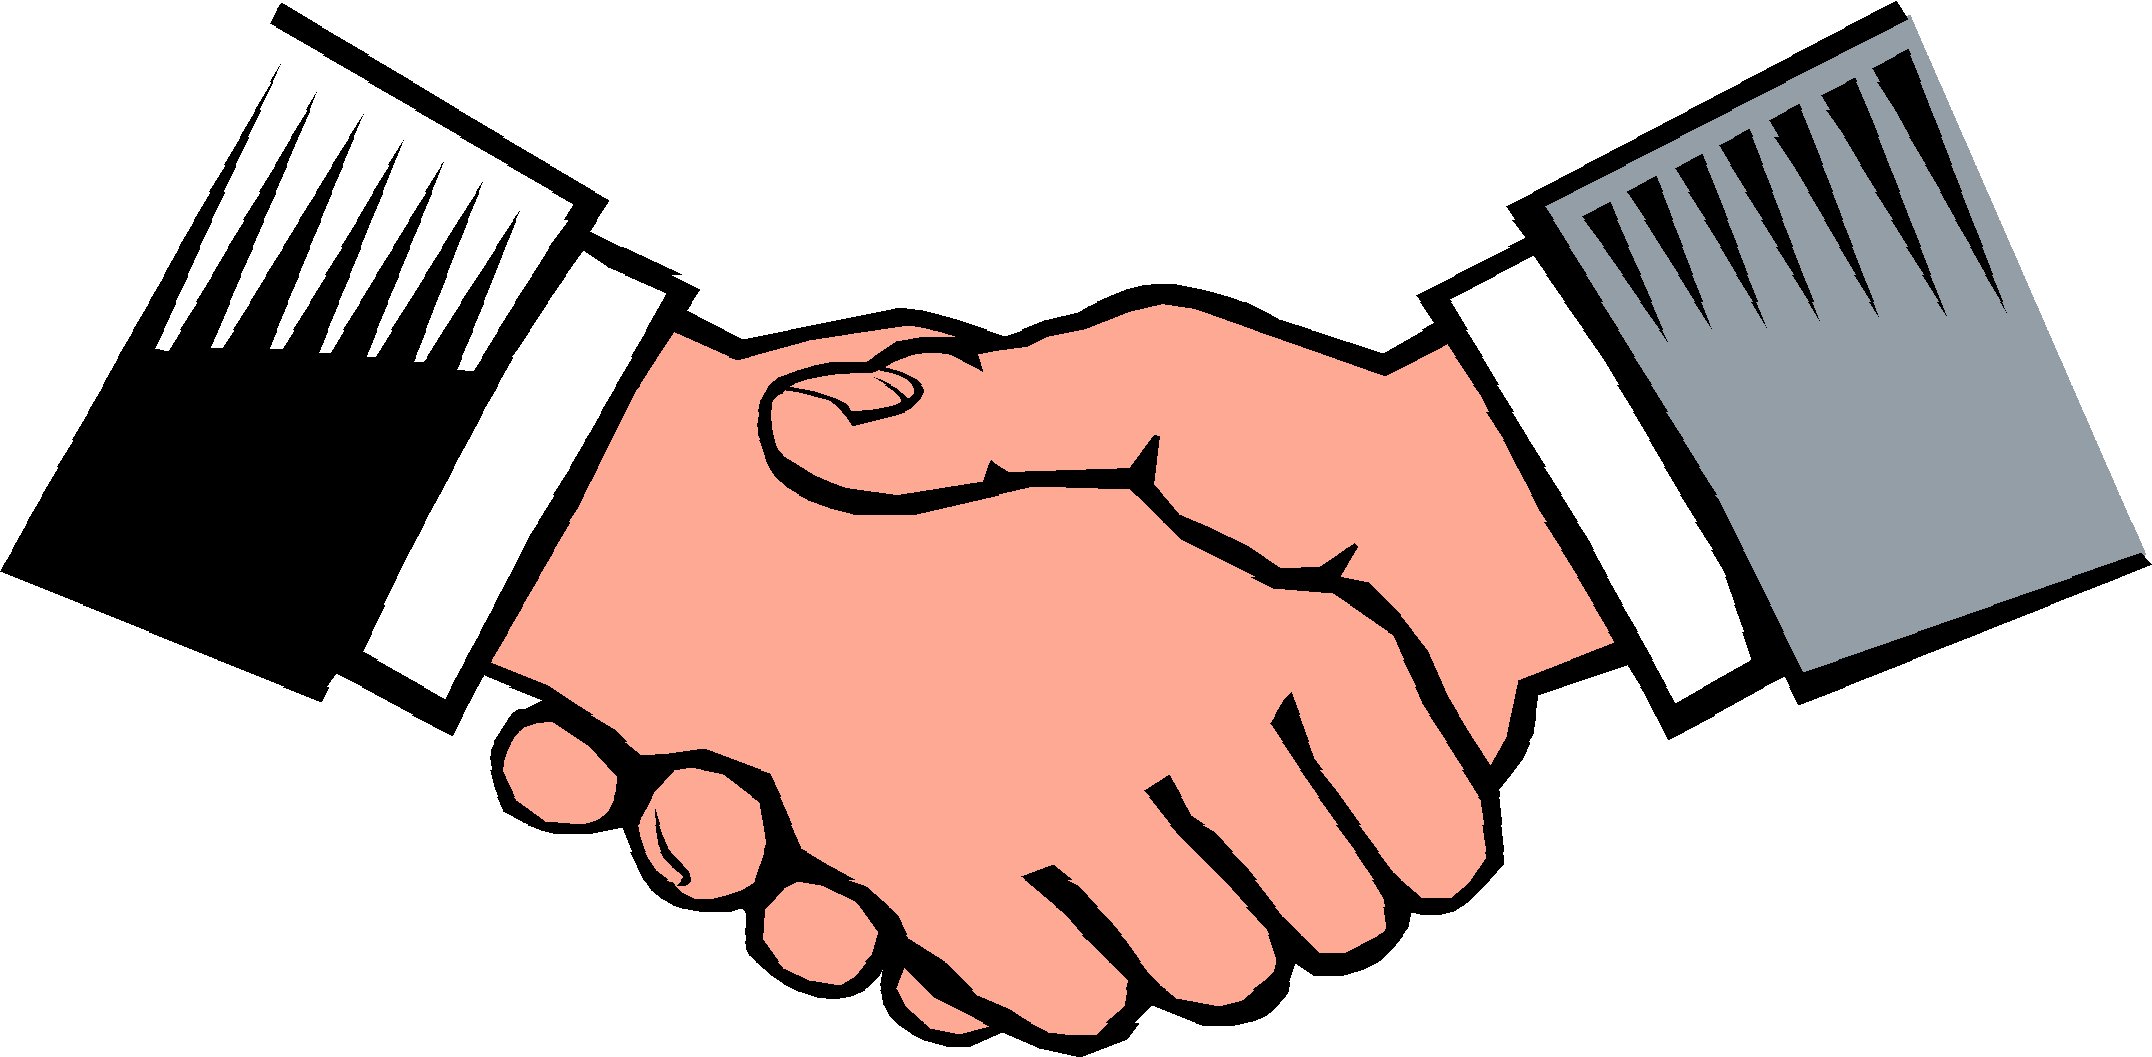 Images shaking hands clipart